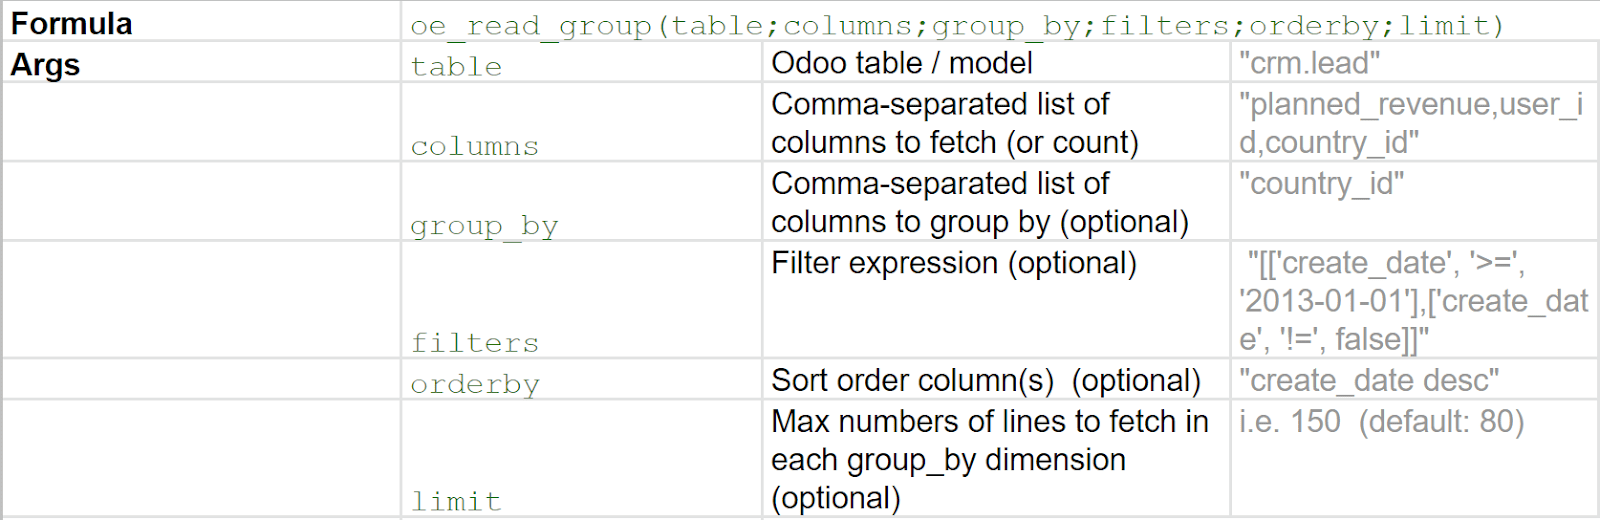 Table with examples of grouped sum arguments to use in Odoo